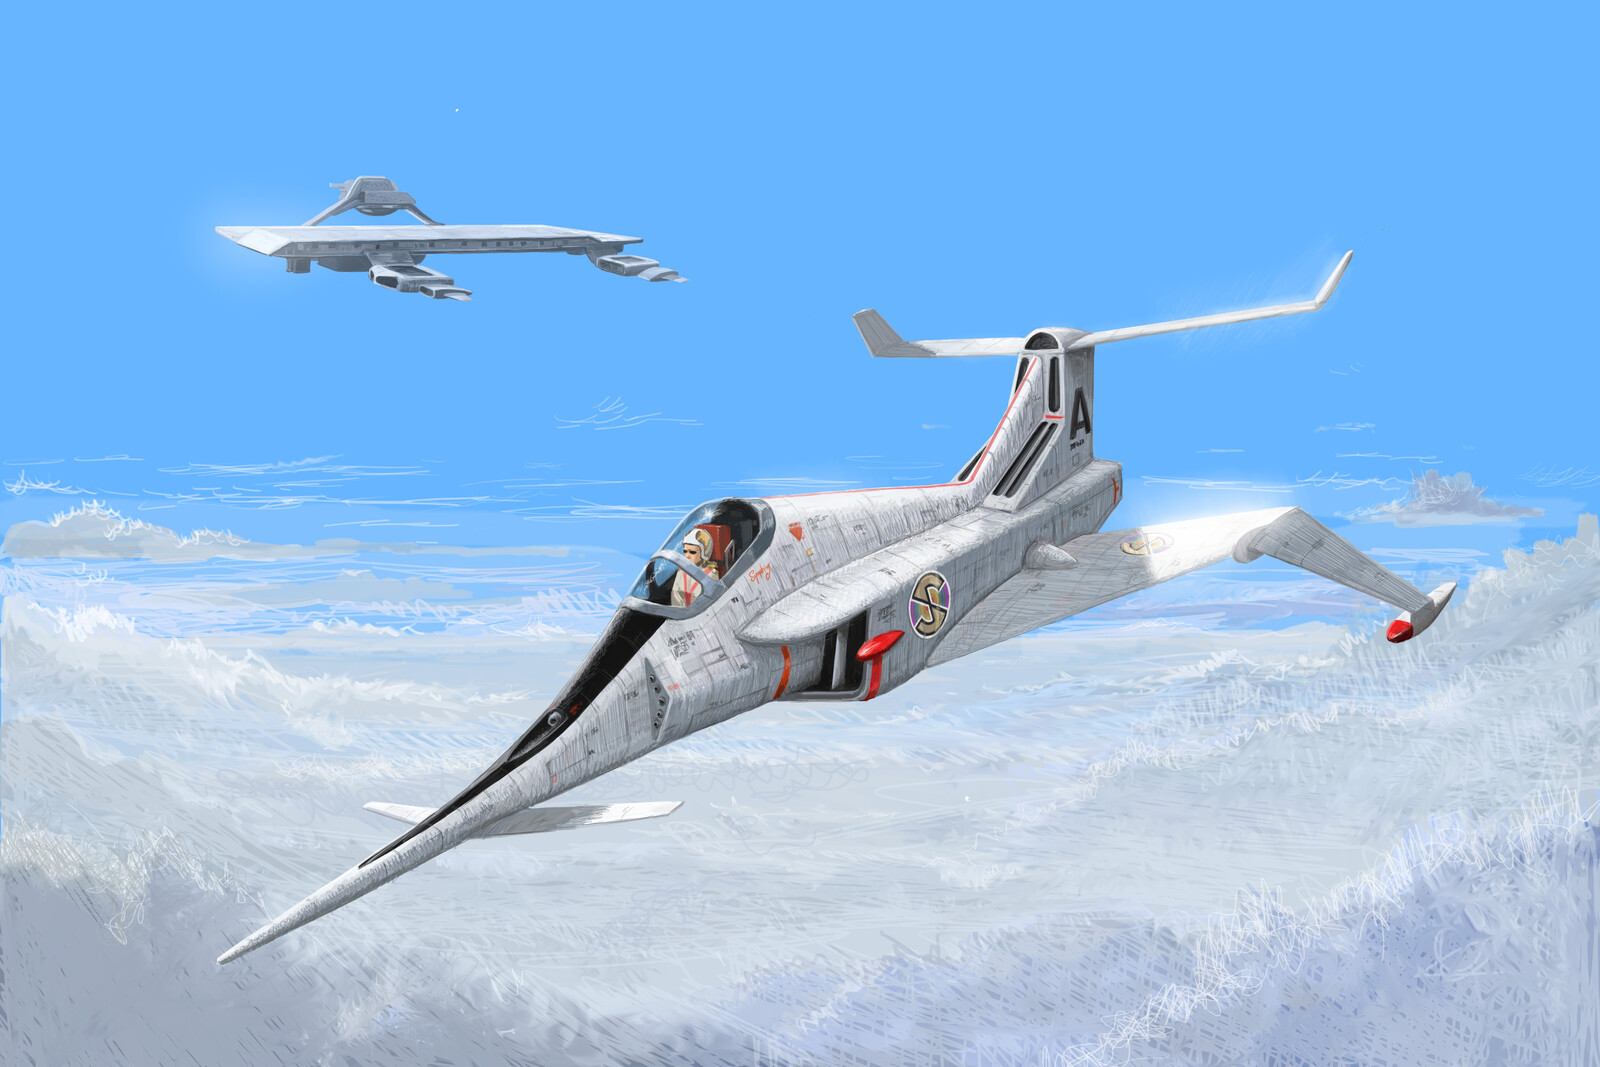 ANGEL INTERCEPTOR
From the 1960s Gerry Anderson TV Series 'Captain Scarlet and the Mysterons'. The strike aircraft of Spectrum stationed at Spectrum headquarters - Cloudbase.  The Angel was designed by the series' Visual Effects Director Derek Meddings.